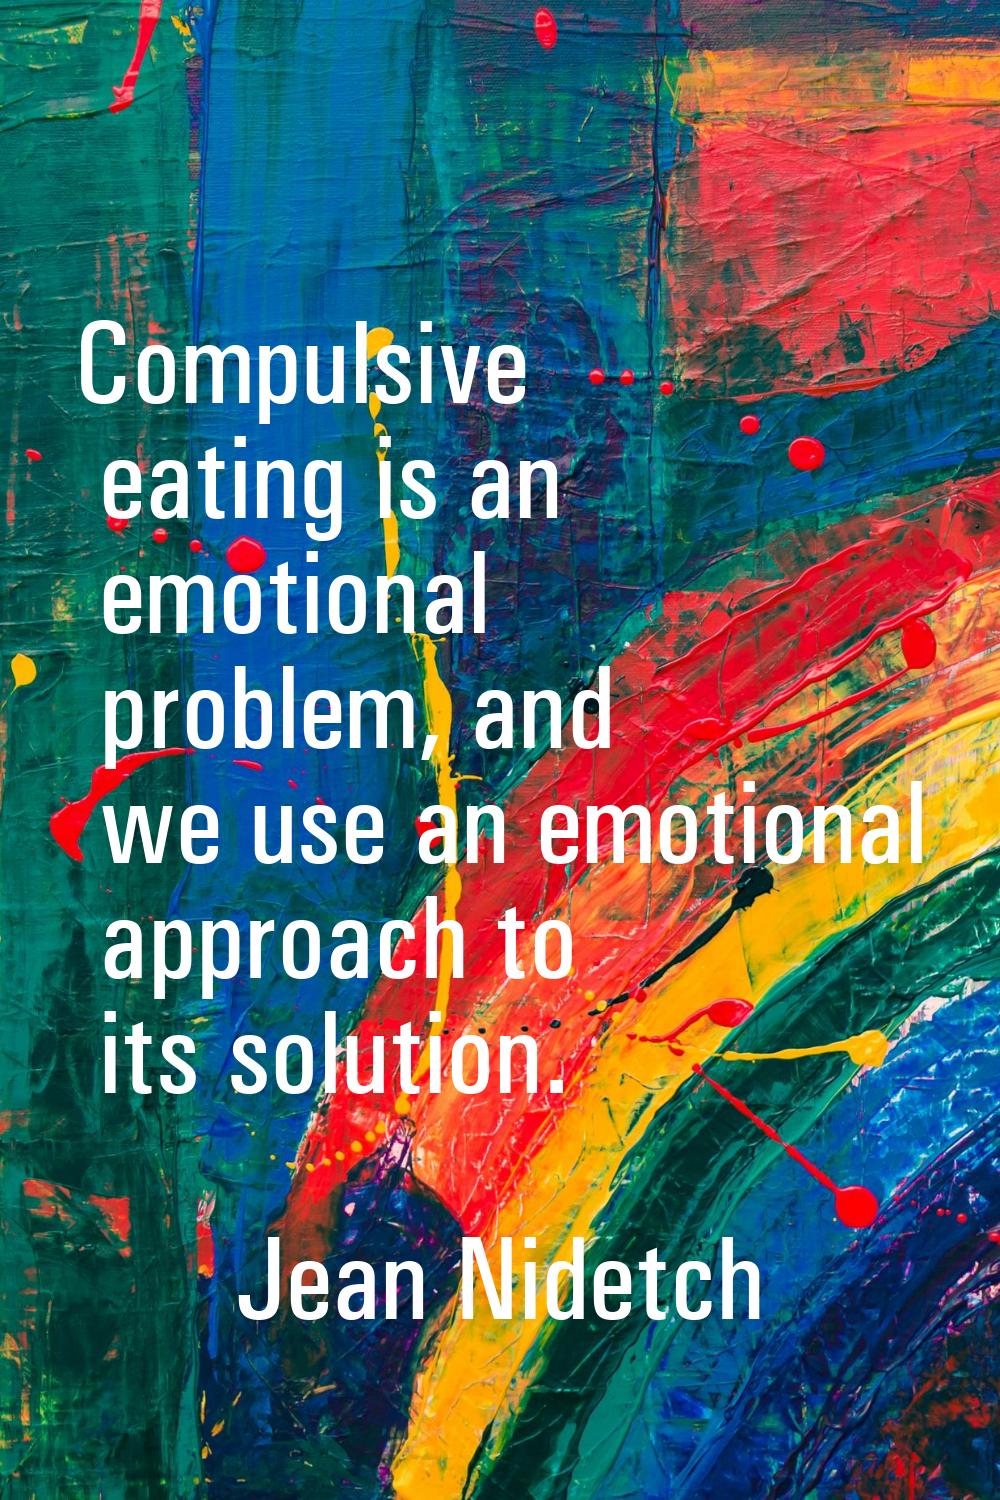 Compulsive eating is an emotional problem, and we use an emotional approach to its solution.